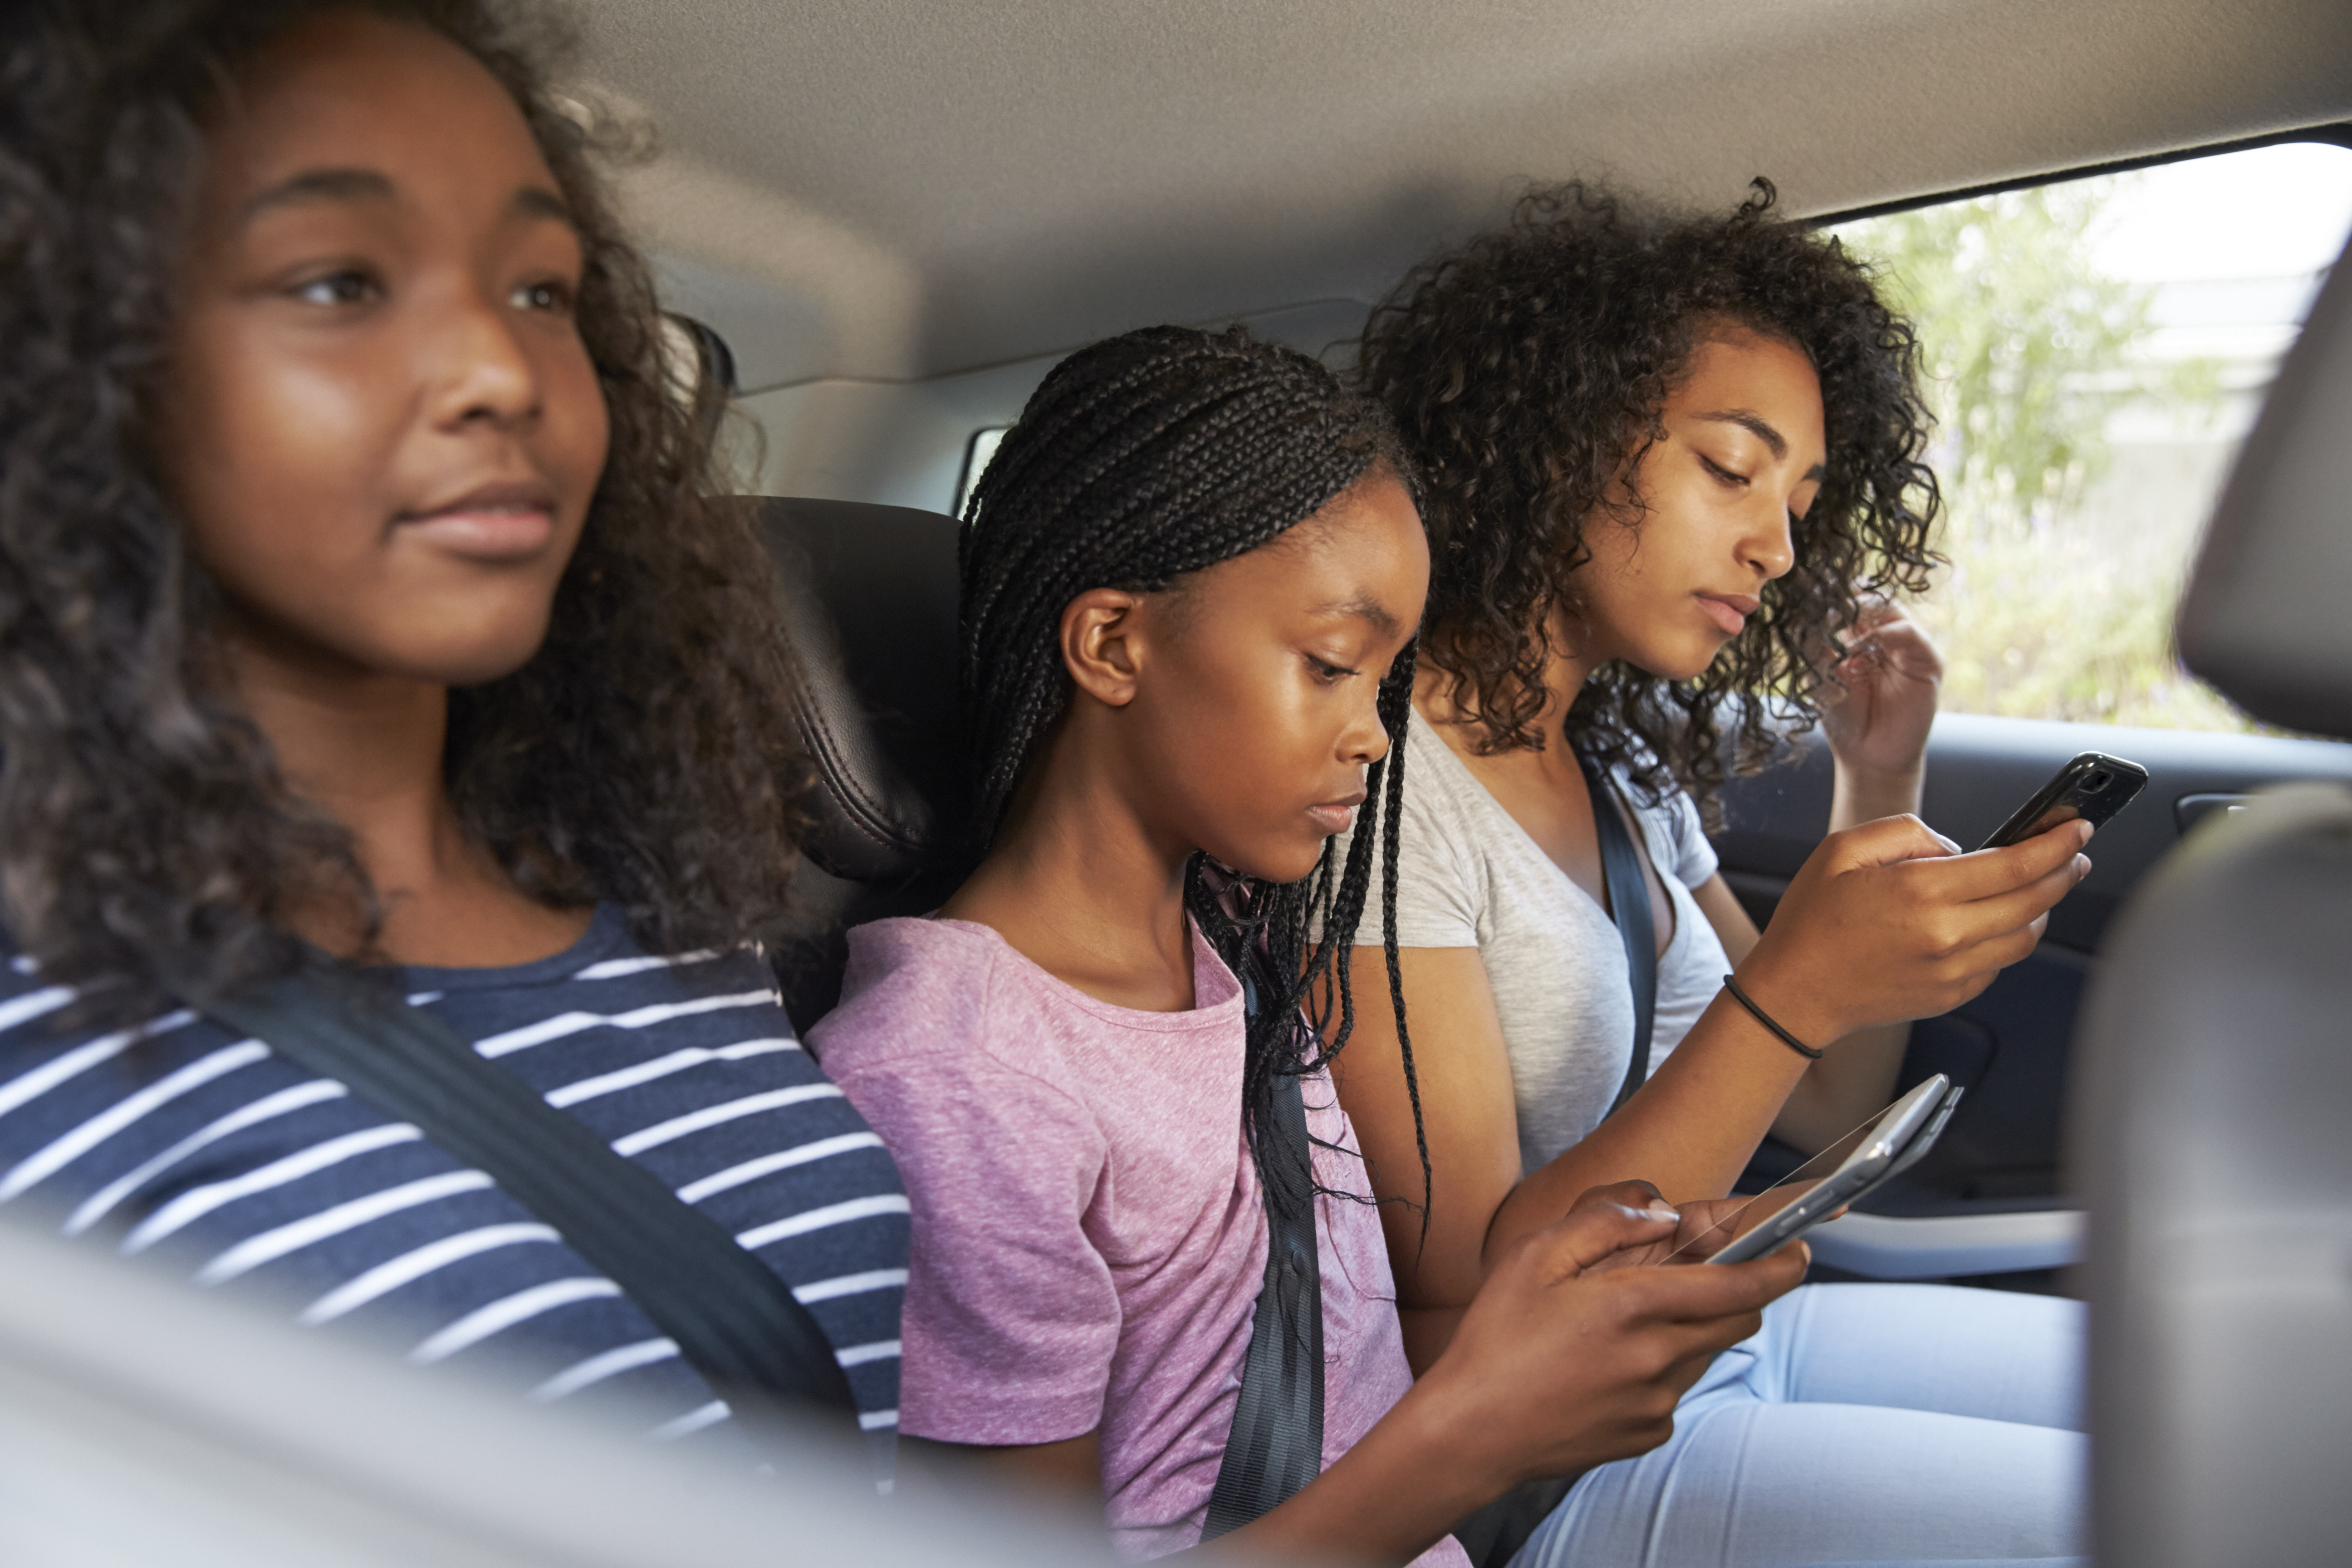 Teenage Children Using Digital Devices On Family Road Trip